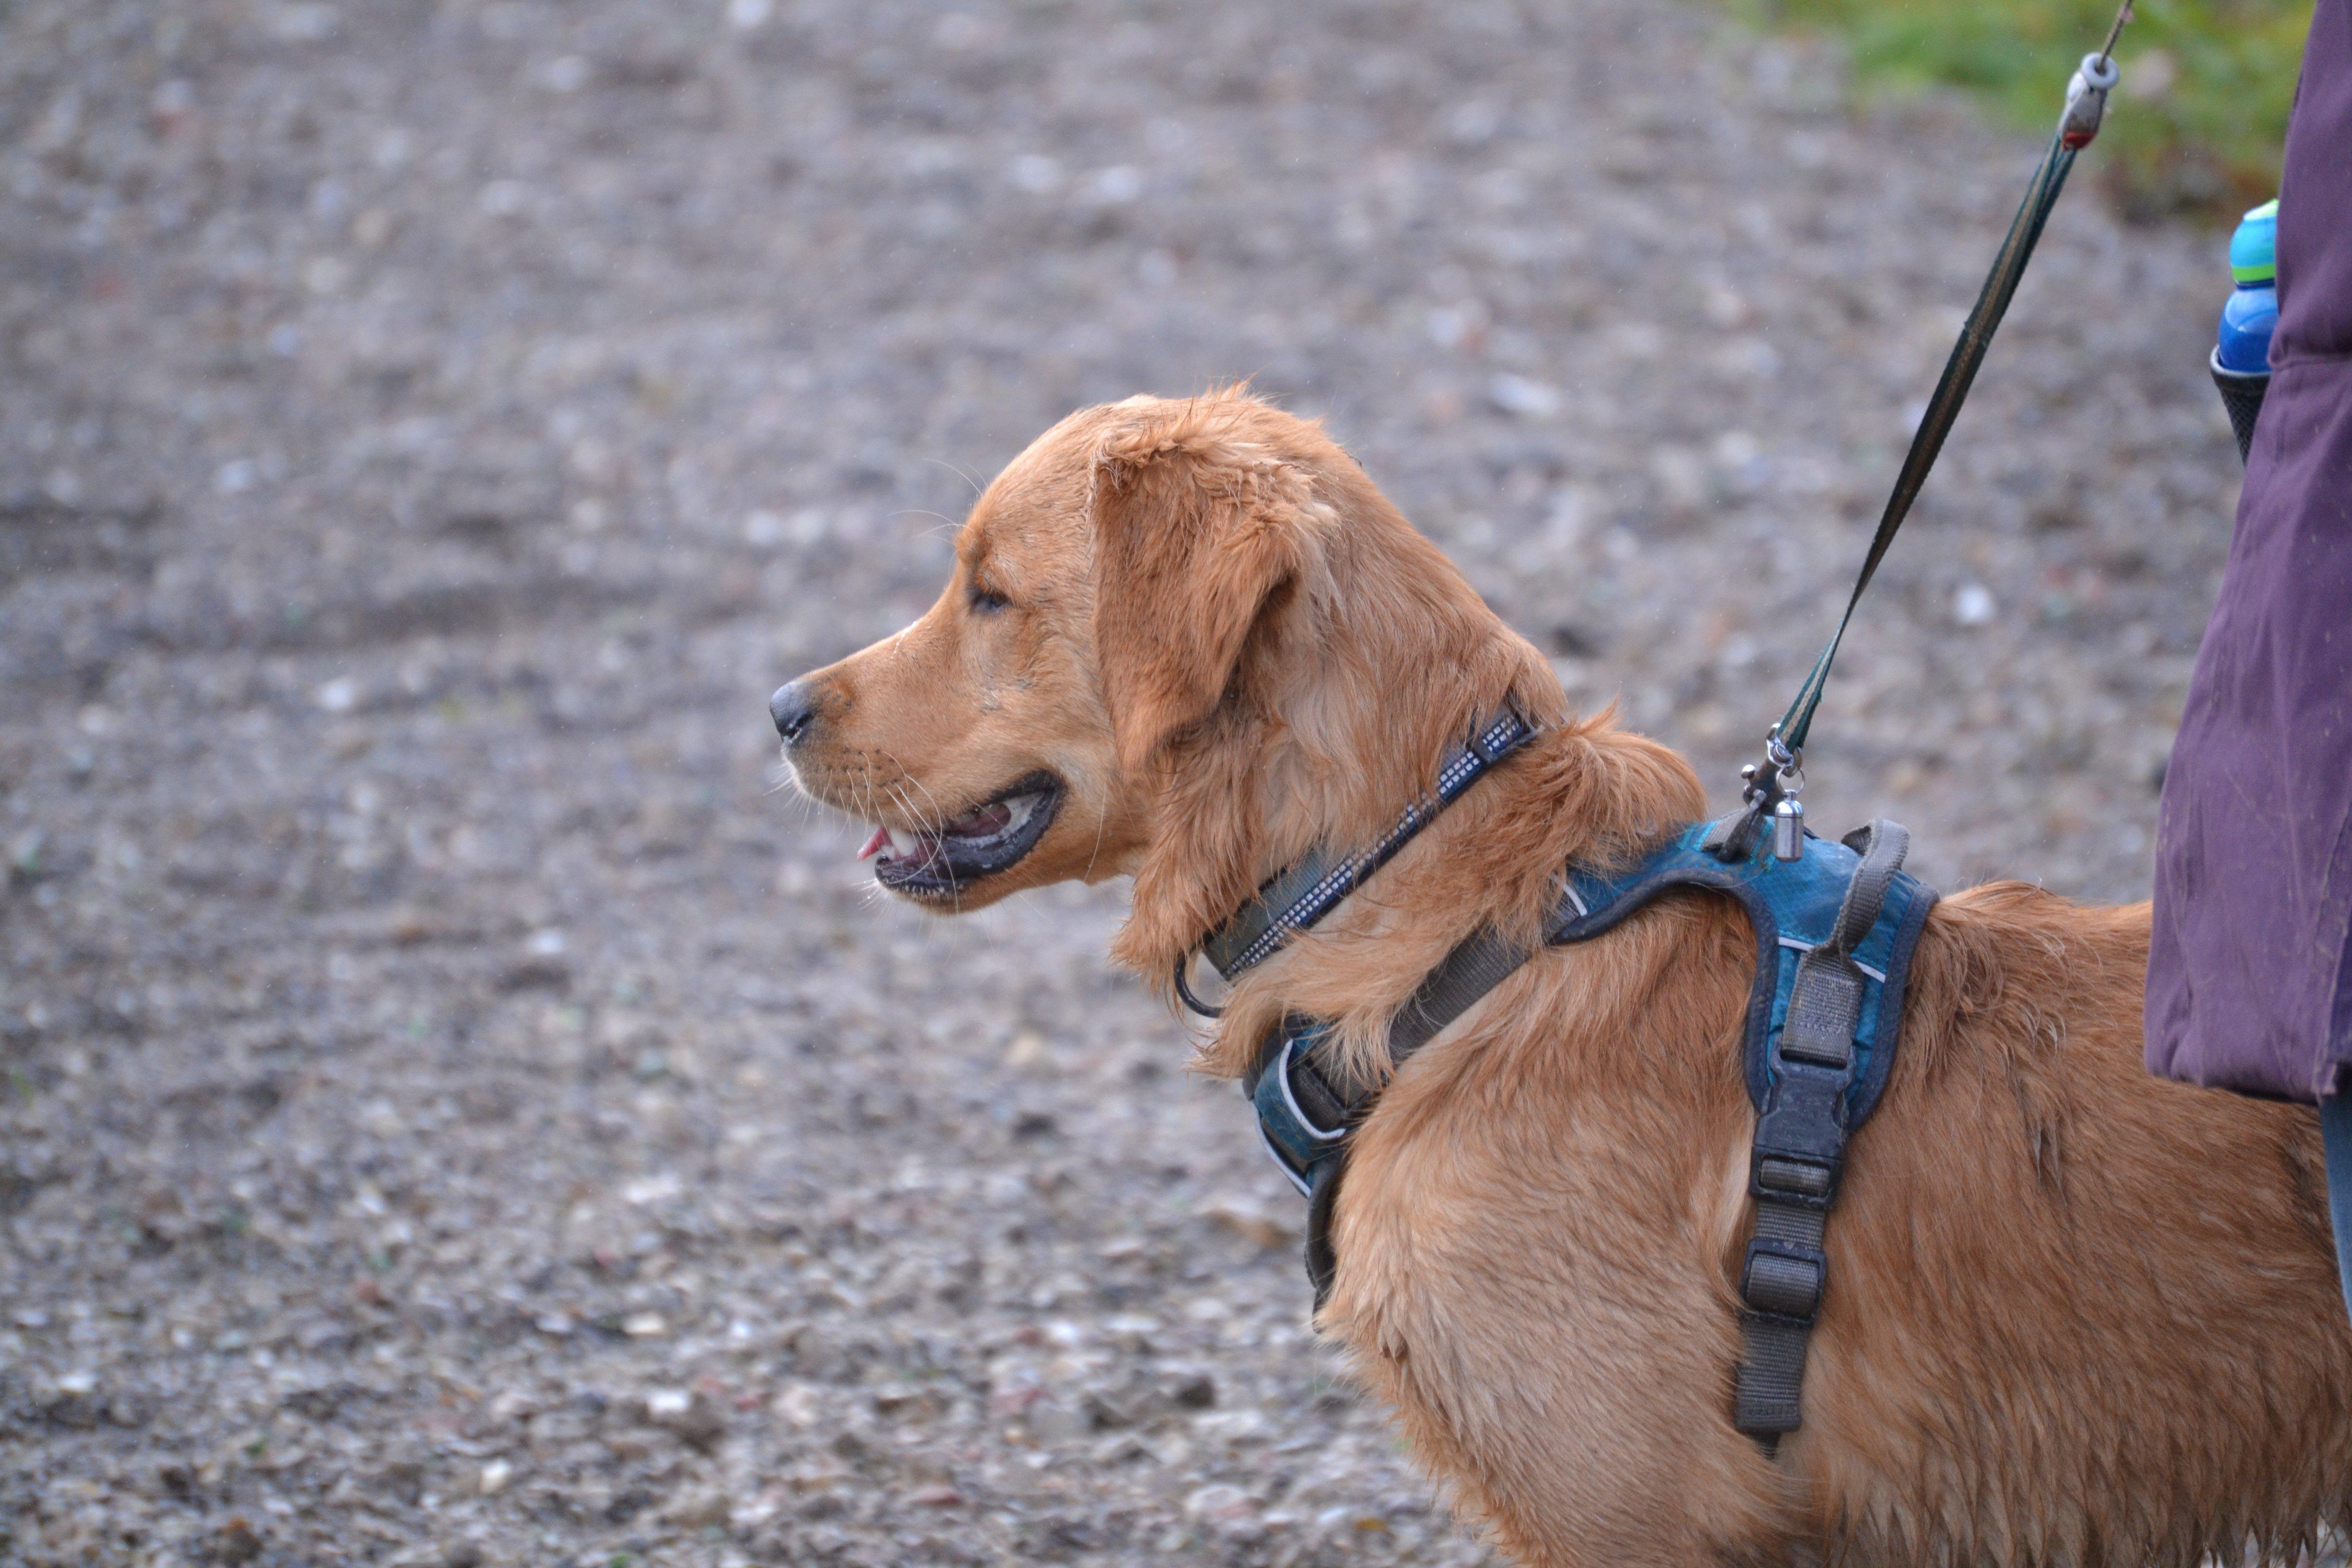 29 retrievers and their owners met at Horsted Green Park on Sunday, January 5, photo courtesy of Millie Goad